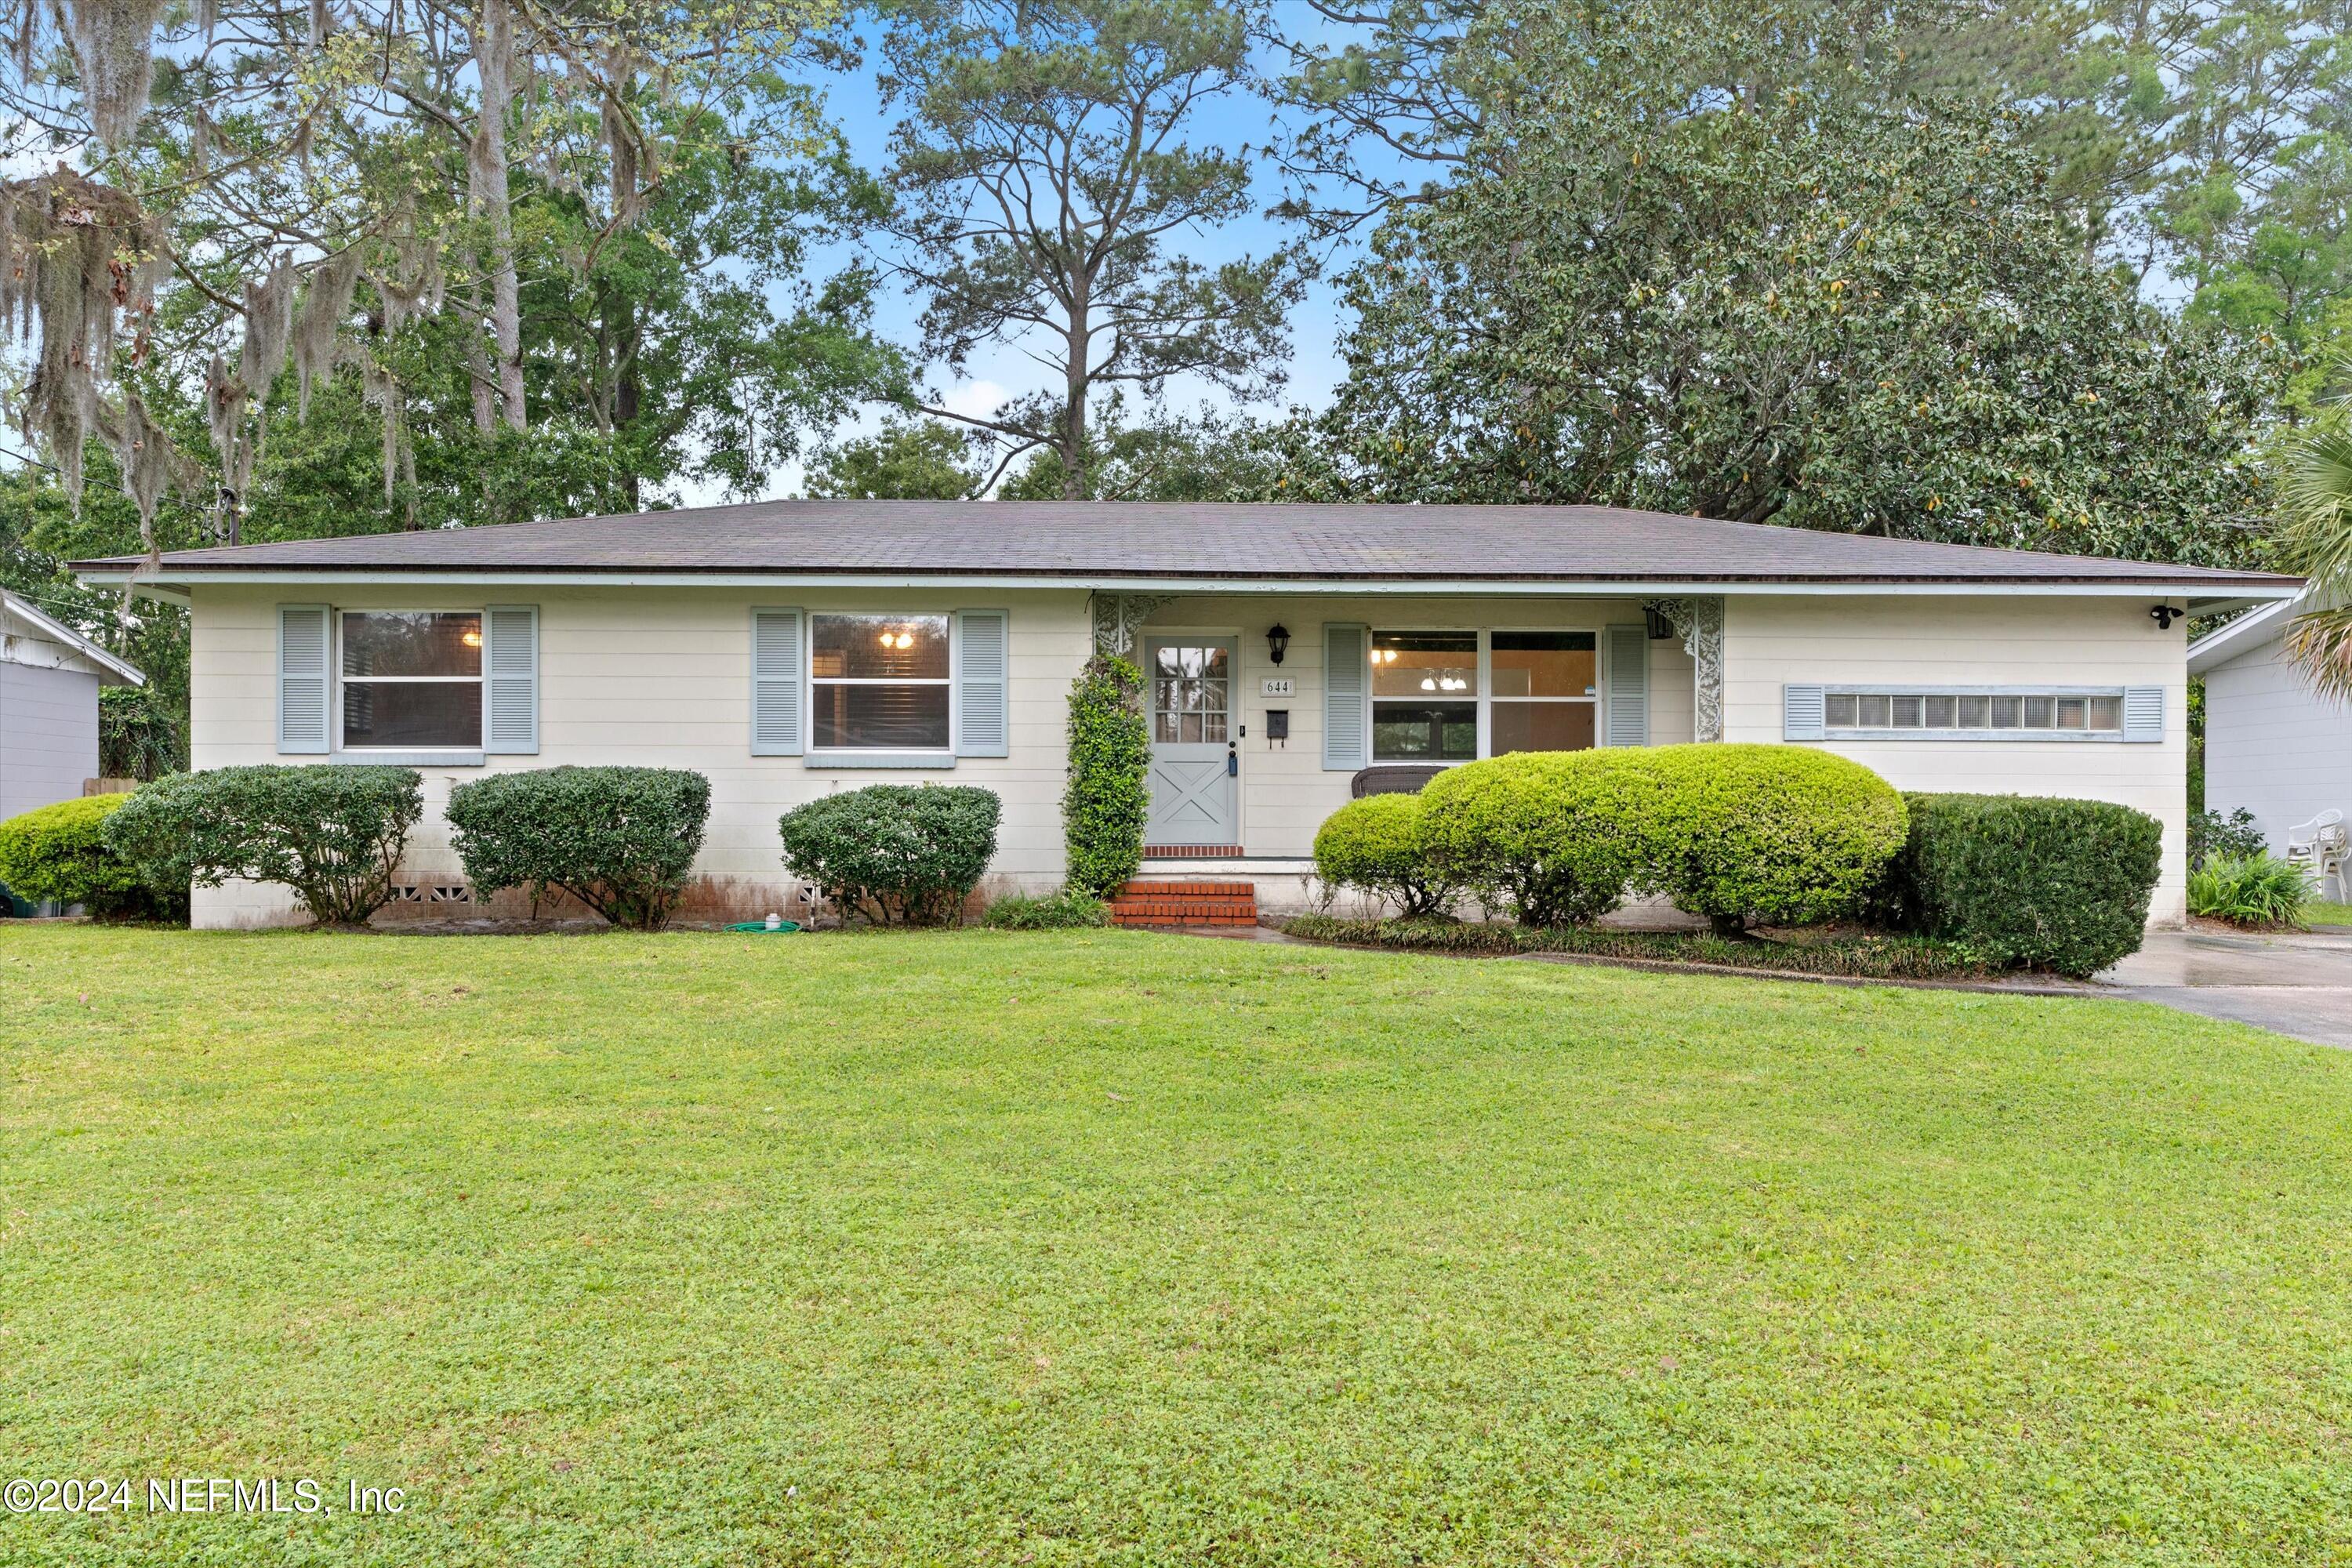 Jacksonville, FL home for sale located at 644 MONTE CARLO Road, Jacksonville, FL 32216